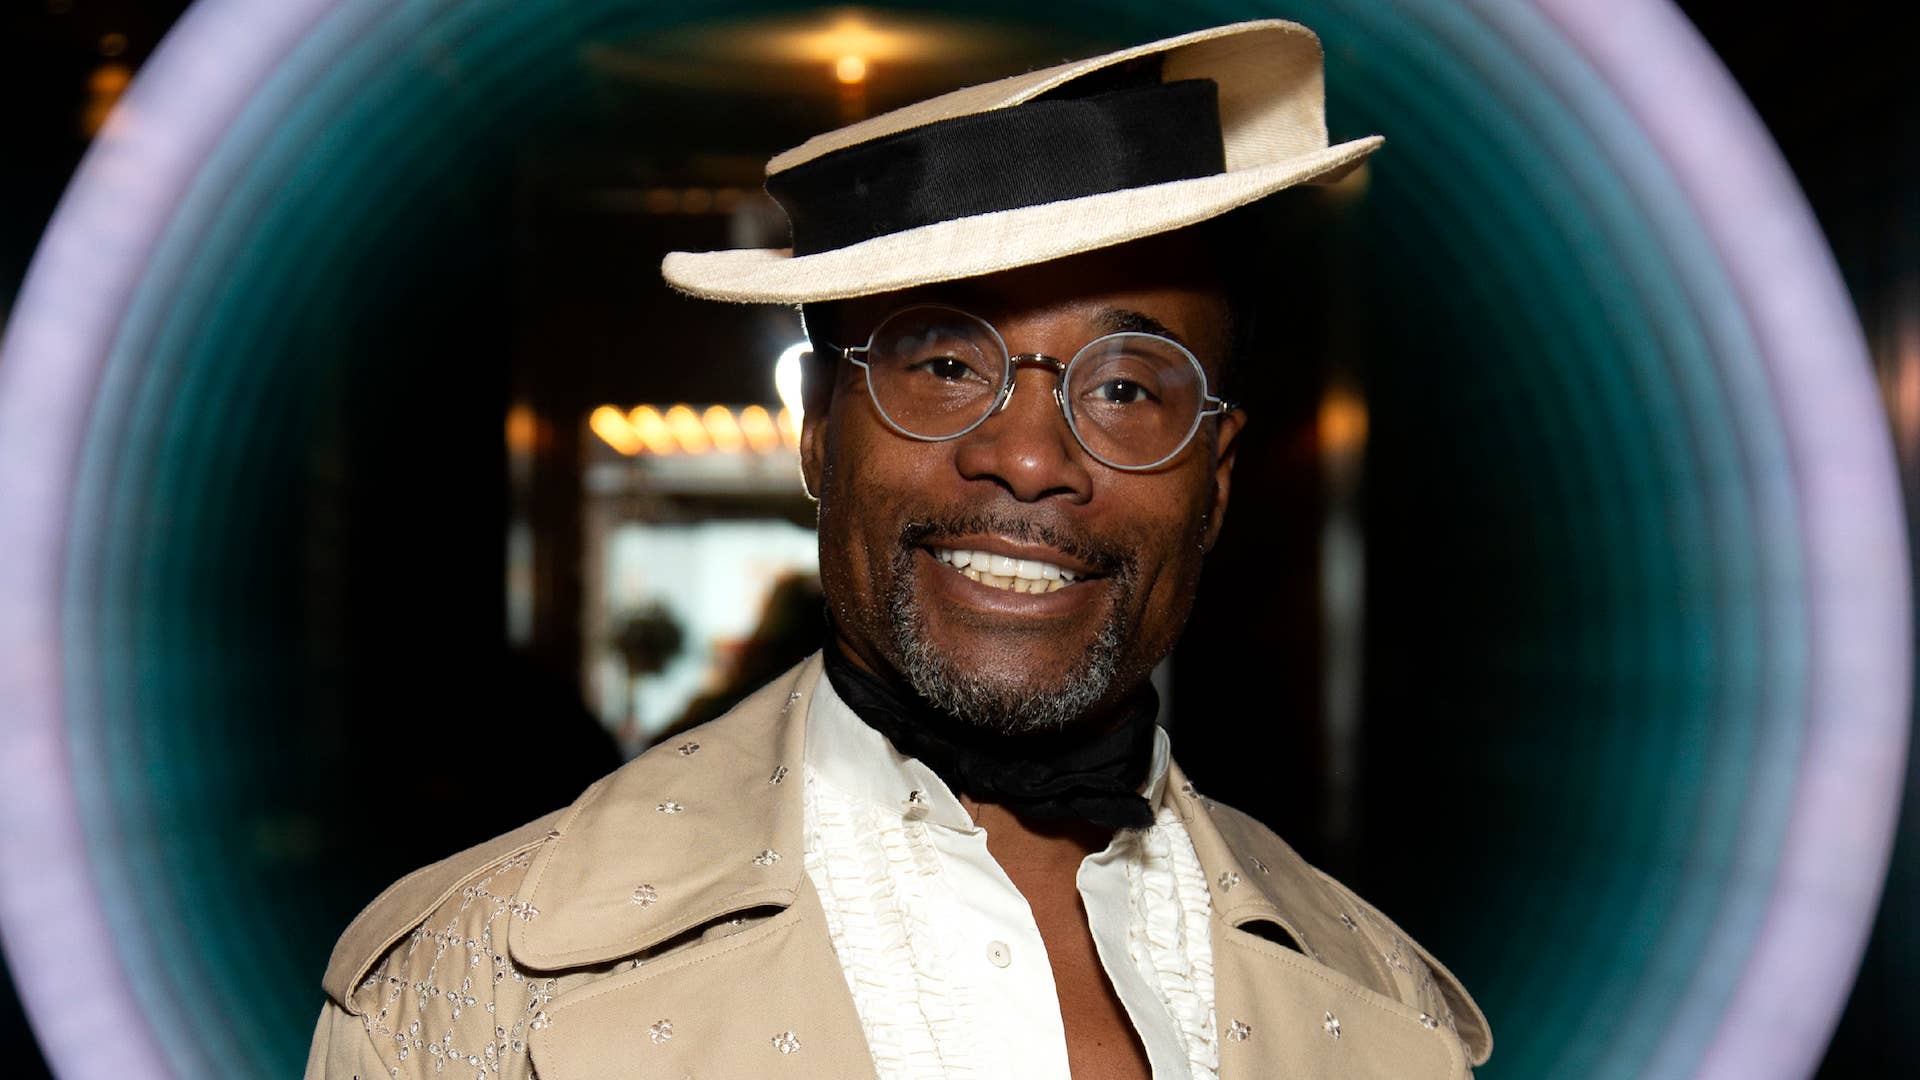 Billy Porter gets ready to attend 'Erdem' fashion show